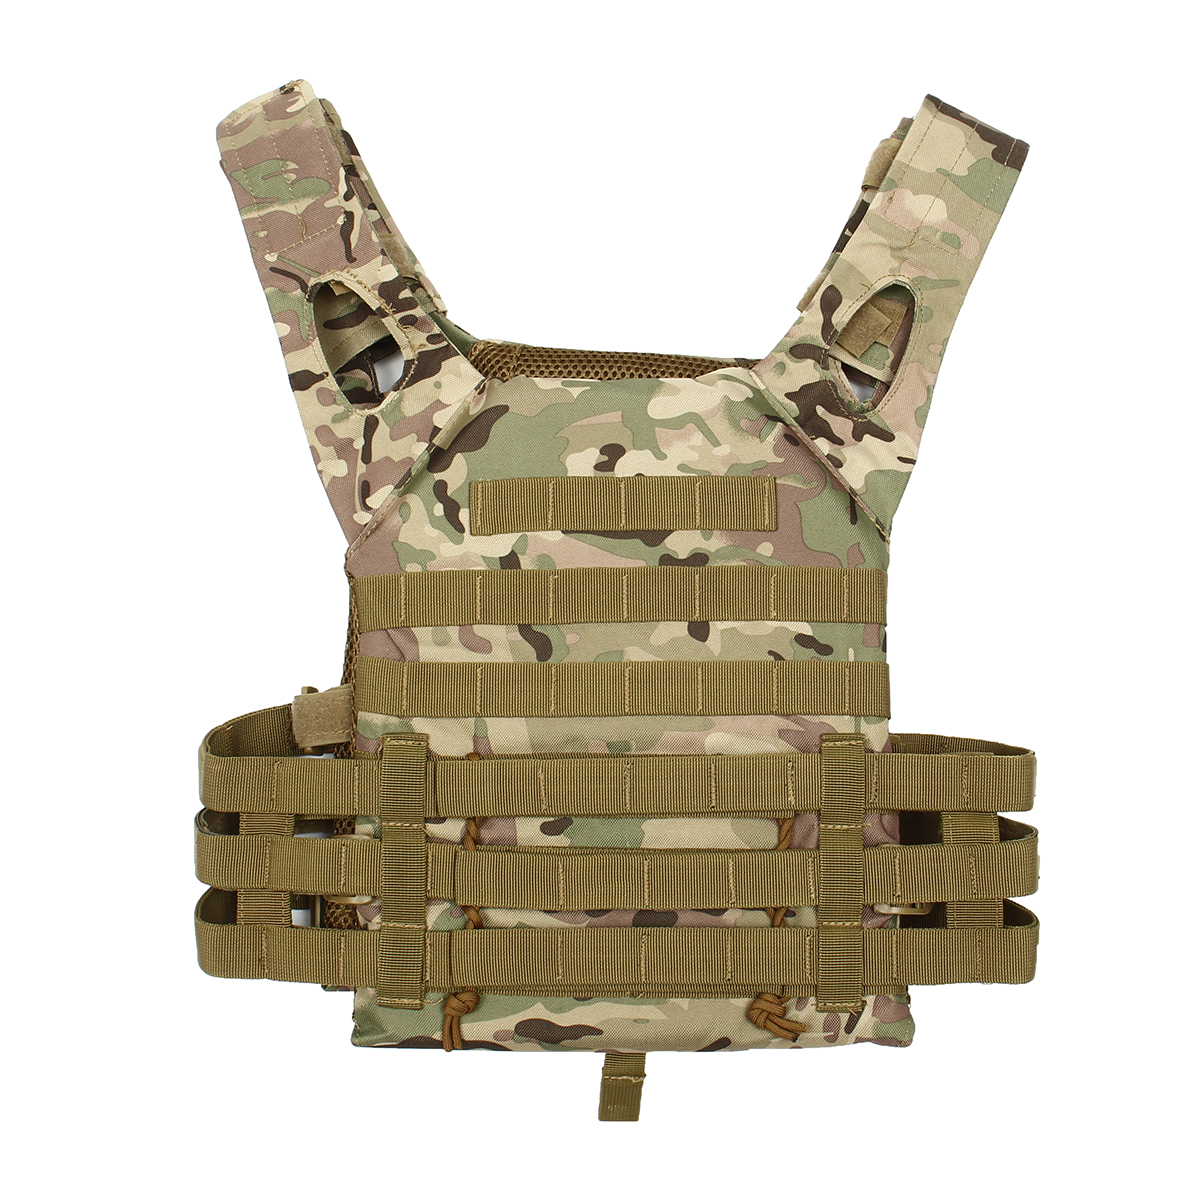 Outdoor-Molle-System-Tactical-Vest-Ultra-Light-Breathable-Adjustable-Armor-Plate-Vest-with-Pouches-1691276-3